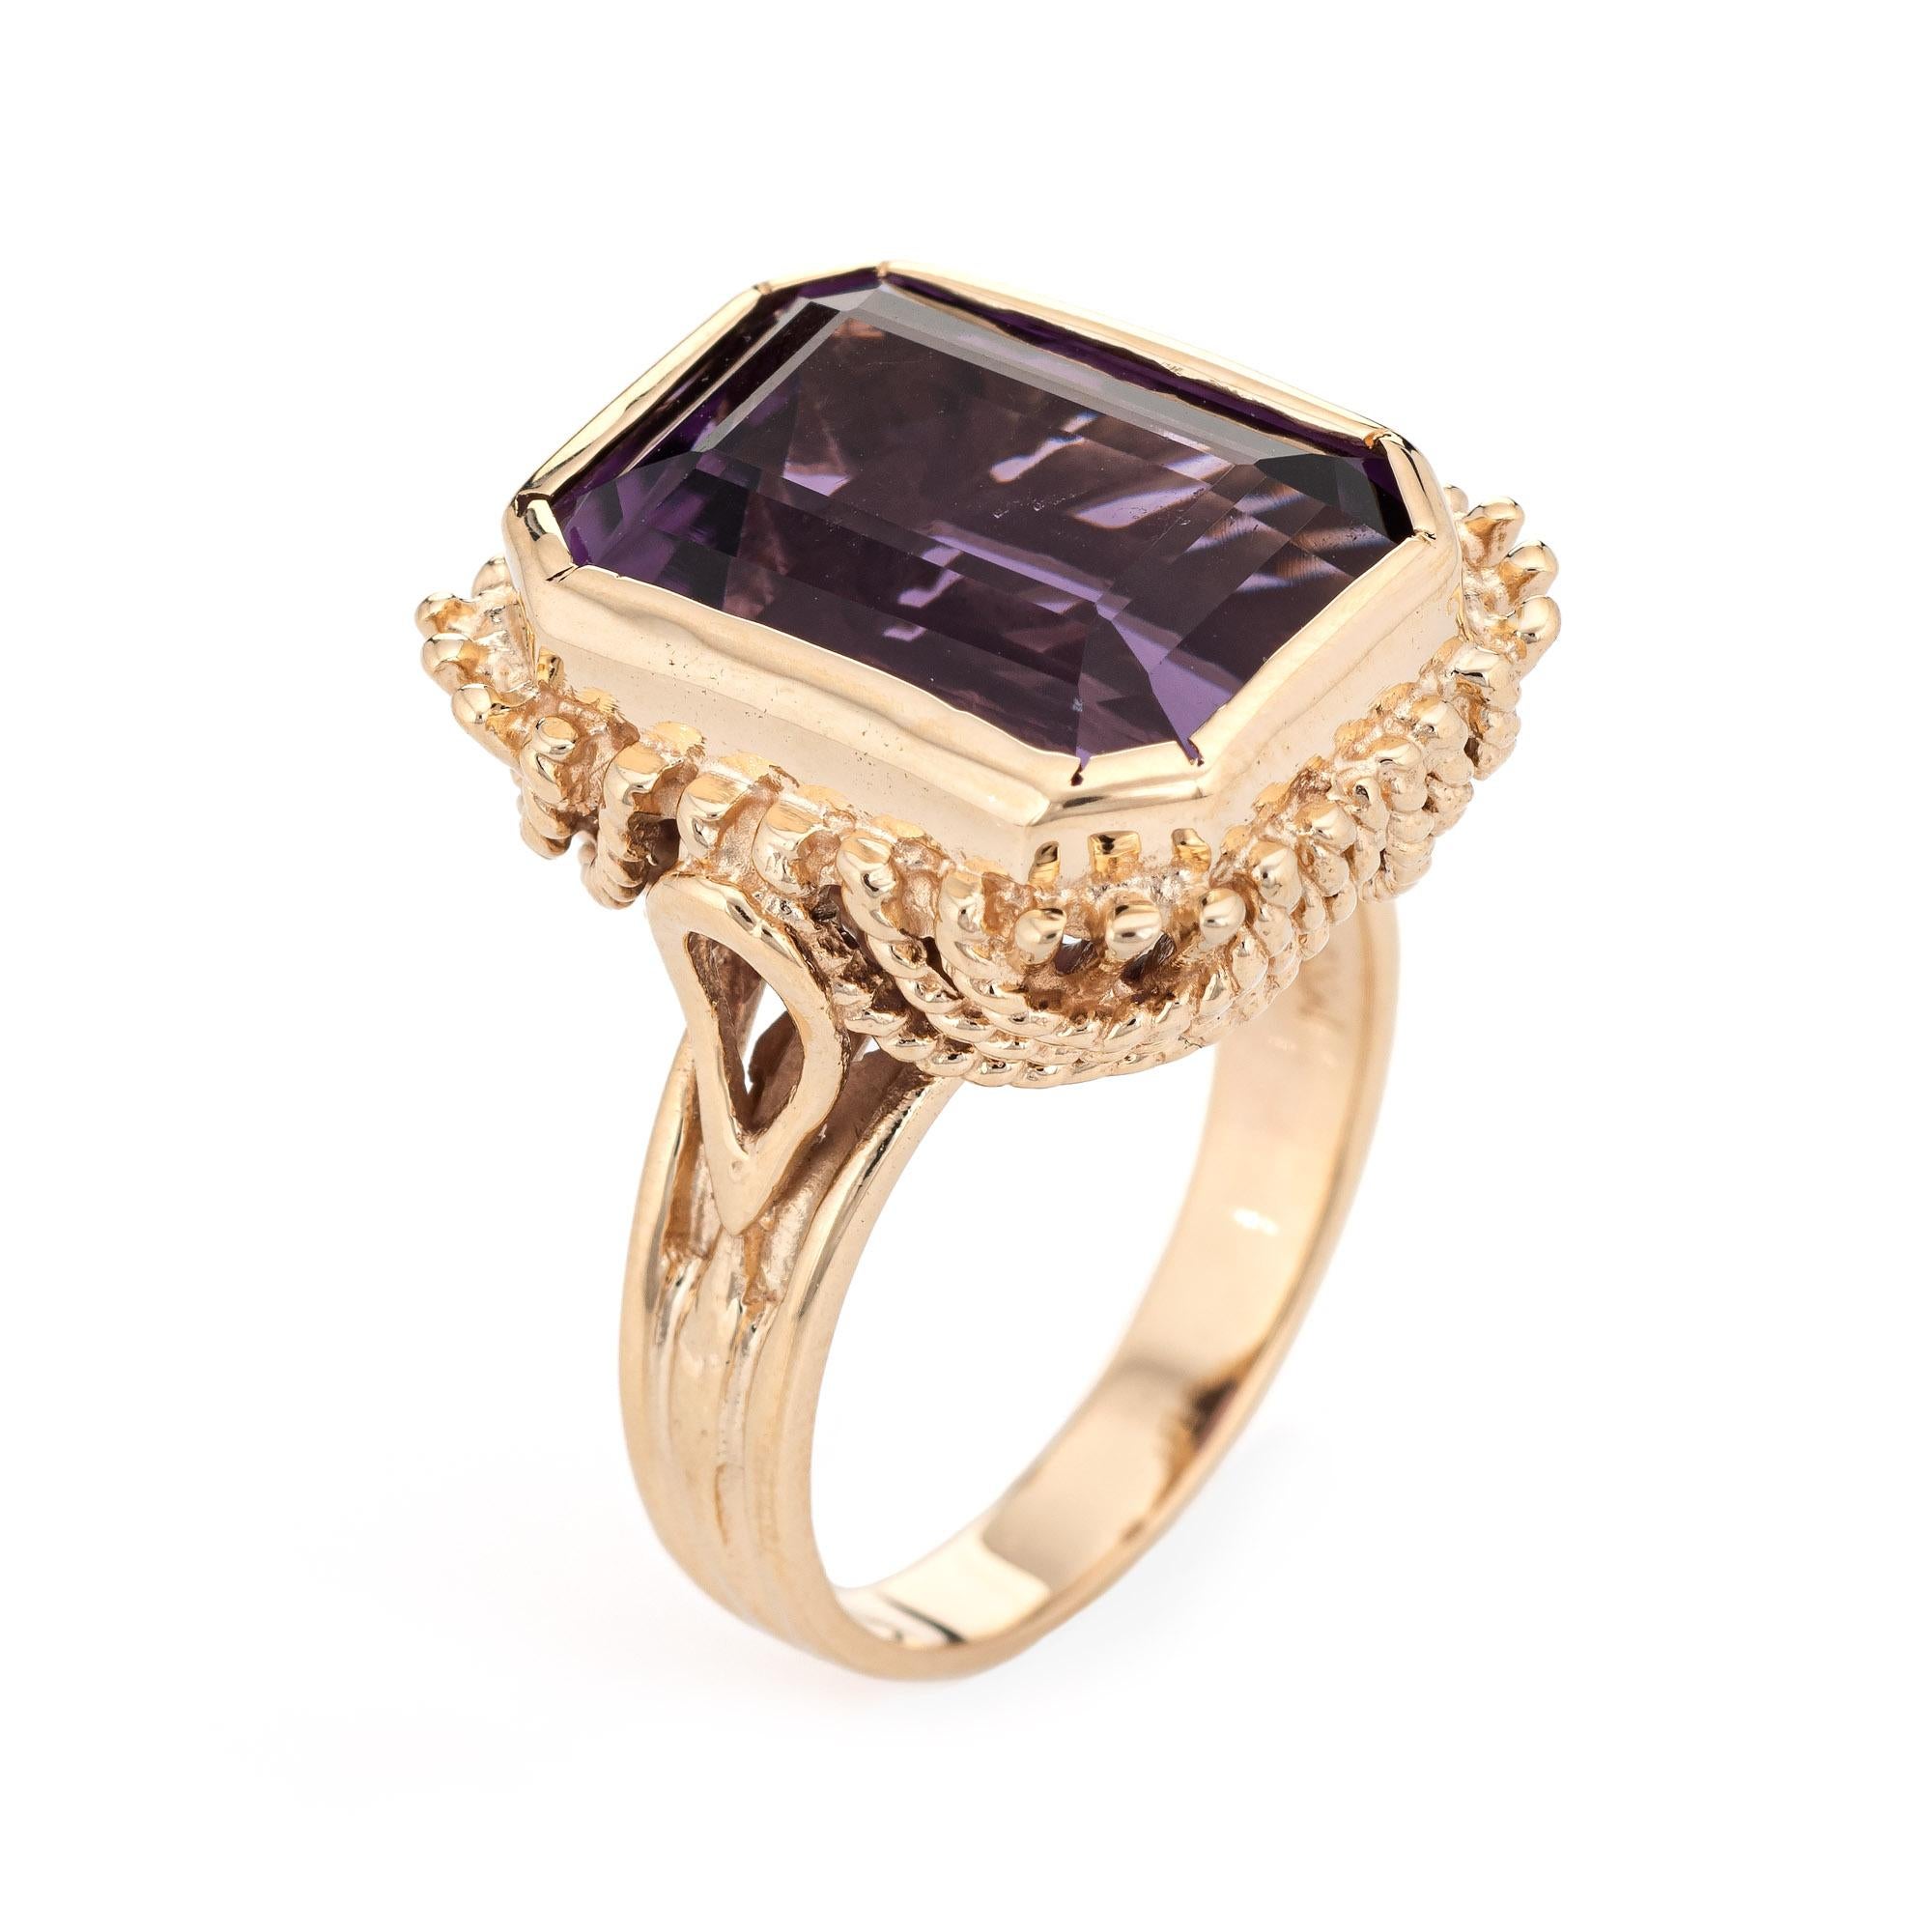 Stylish vintage amethyst square cocktail ring (circa 1970s to 1980s) crafted in 14 karat yellow gold. 

Emerald cut amethyst measures 16mm x 11mm (estimated at 9 carats). The amethyst is in very good condition and free of cracks or chips. 

The rich